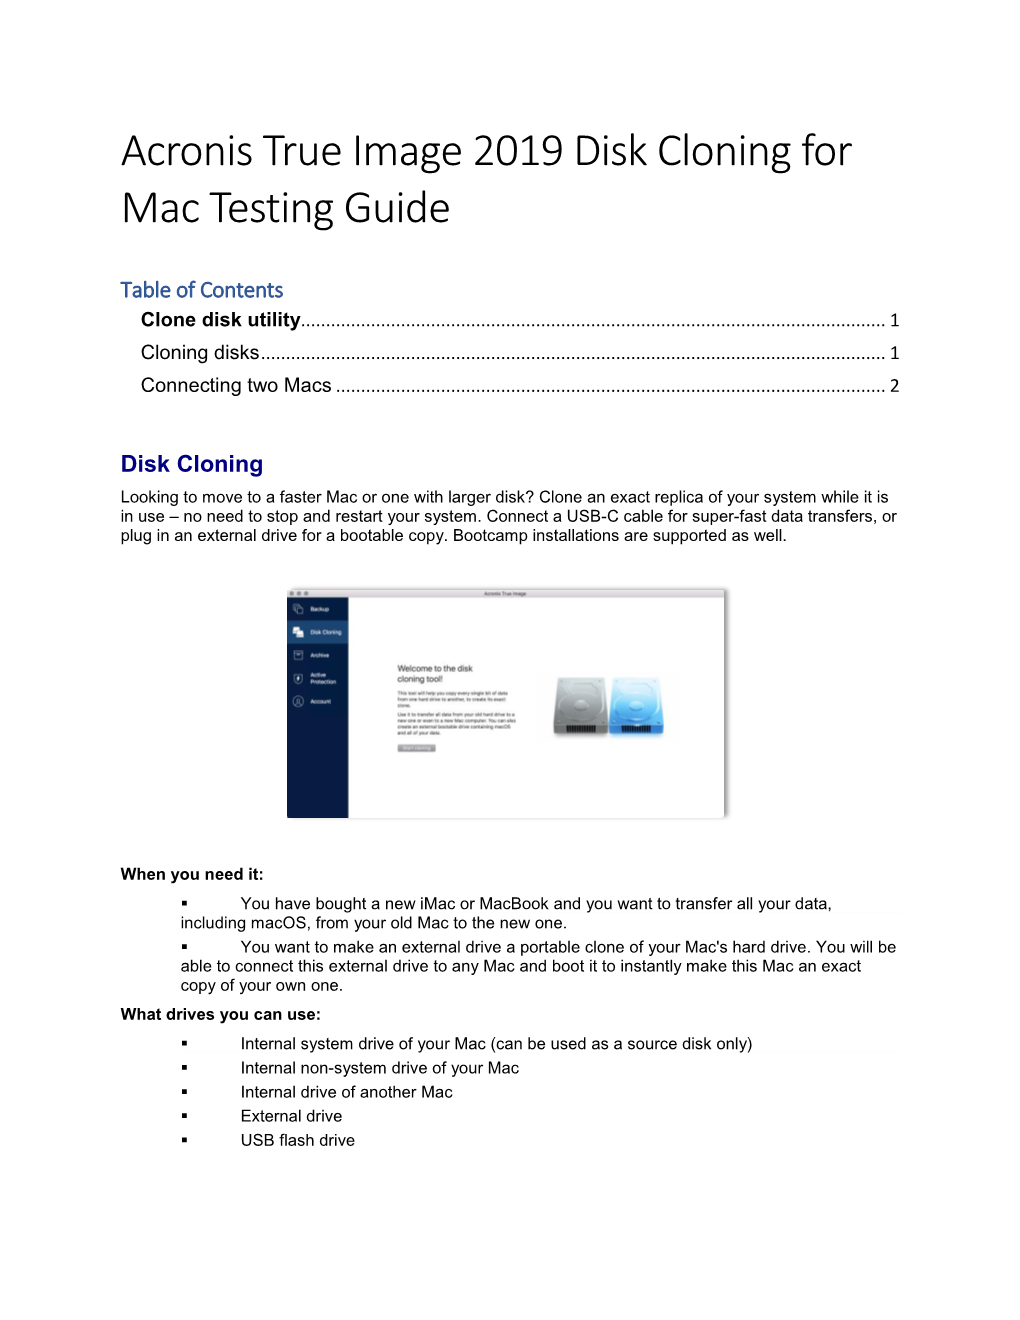 Acronis True Image 2019 Disk Cloning for Mac Testing Guide